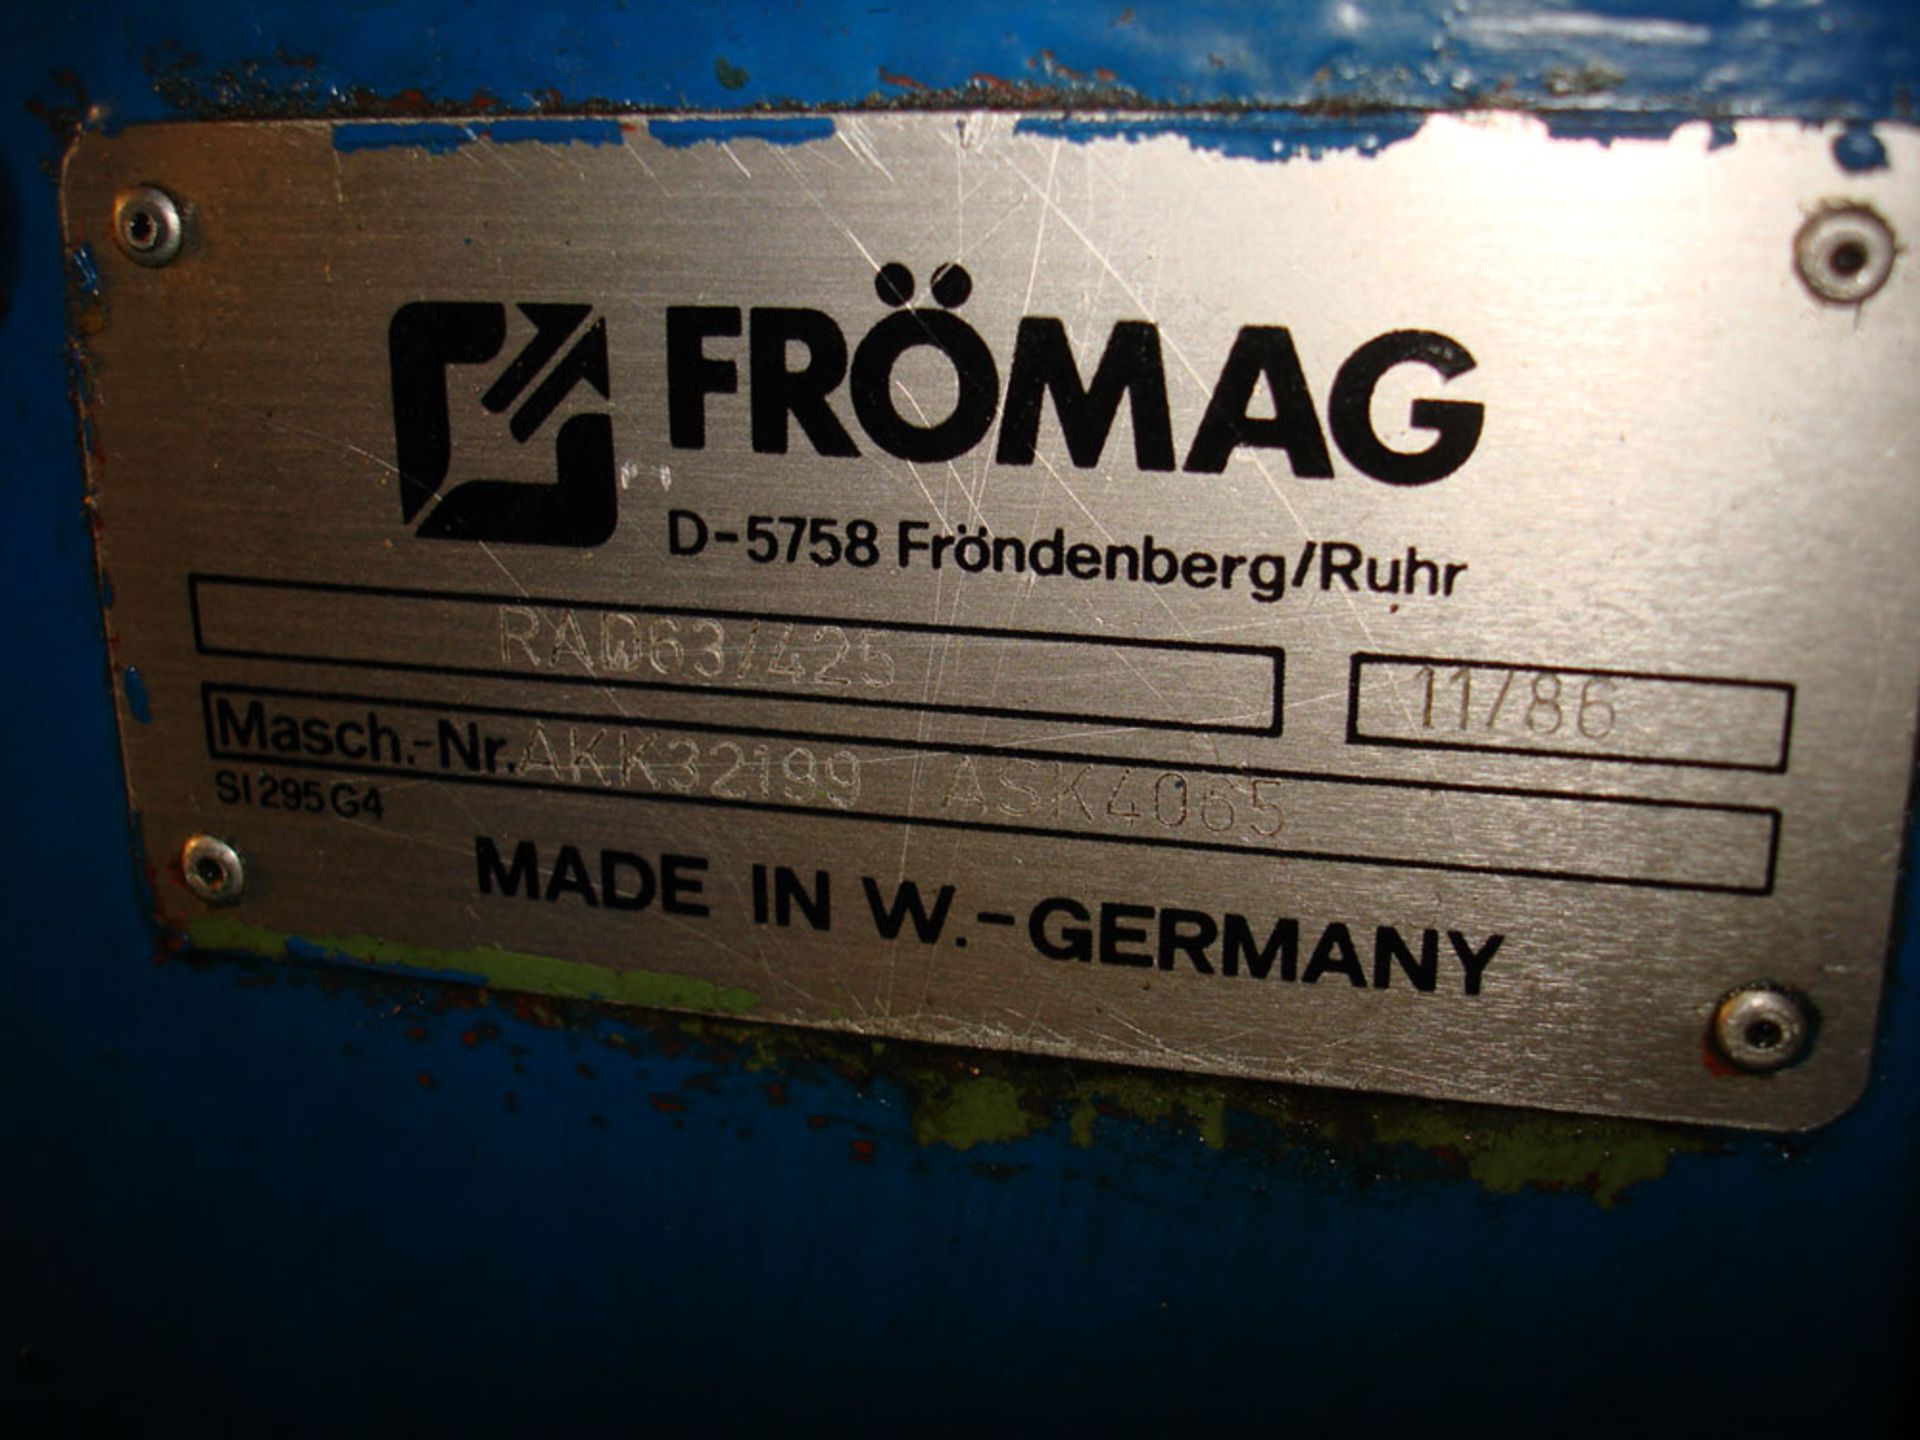 Fromag Rapida RAD 63/425 Broach / Key Seater. New 1986. Pendant Control. - Image 10 of 10